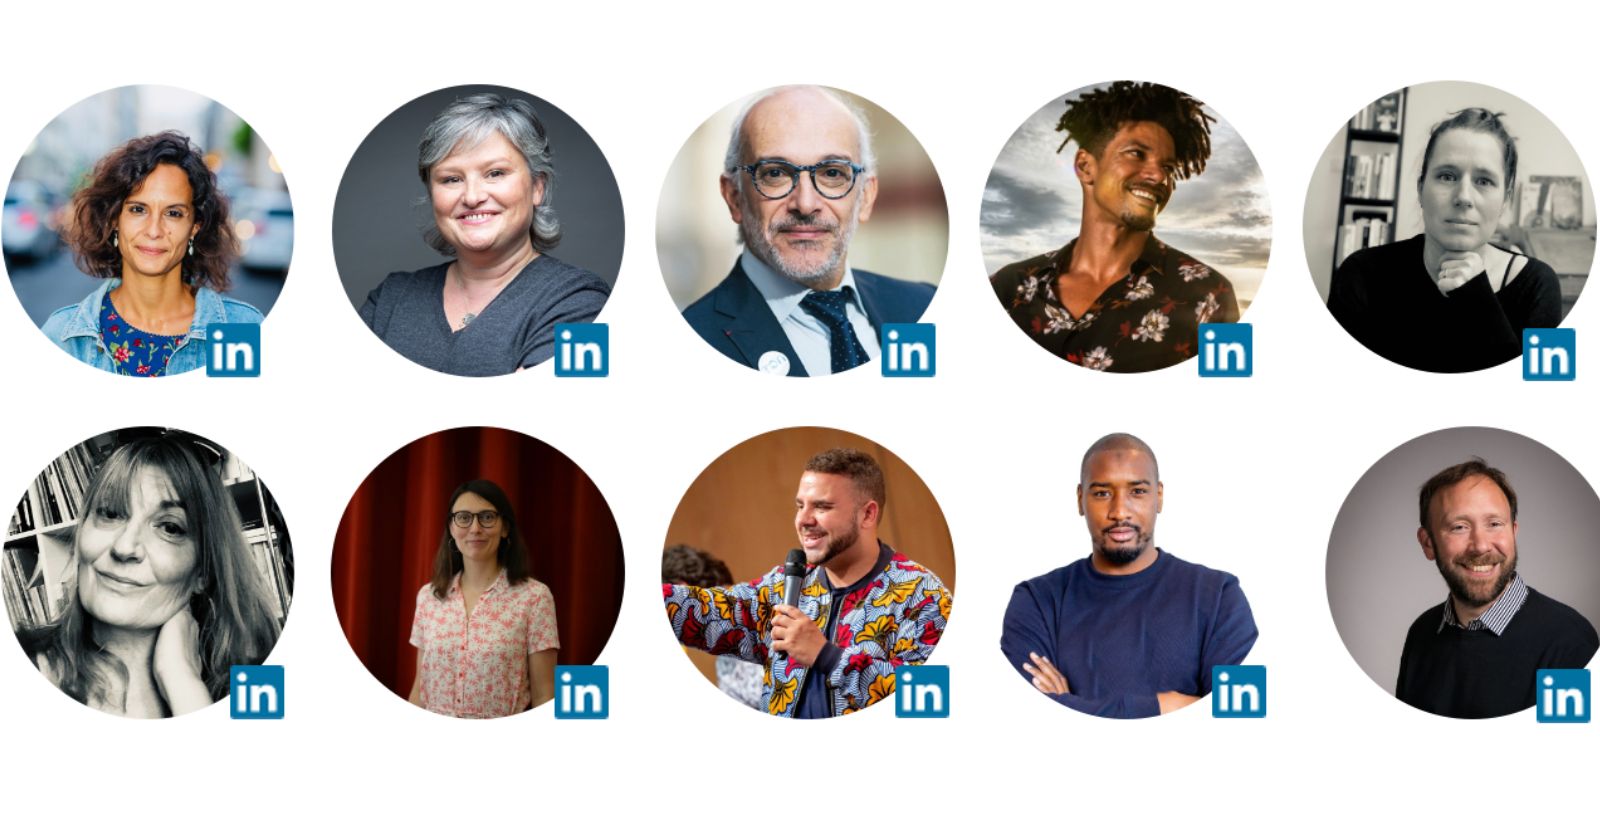 Solidarity, Employment and Inclusion: Here are the 10 Most Influential Personalities on Linkedin